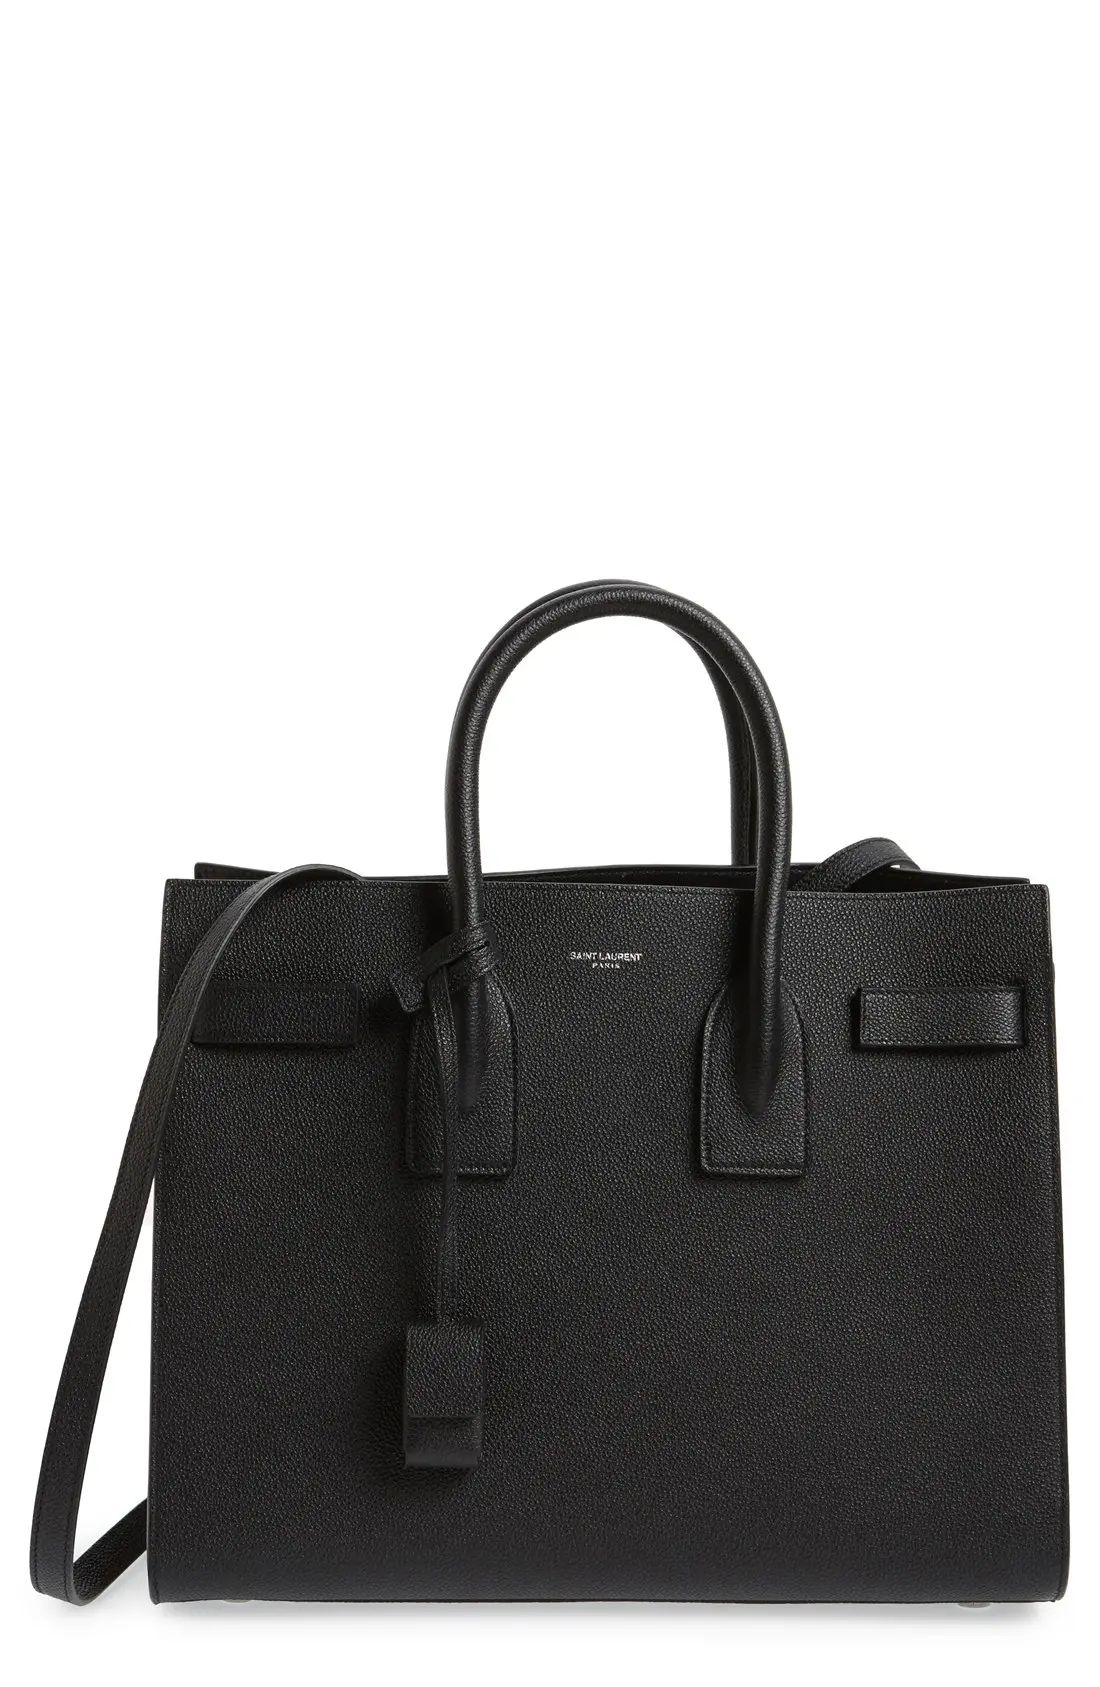 'Small Sac de Jour' Leather Tote | Nordstrom